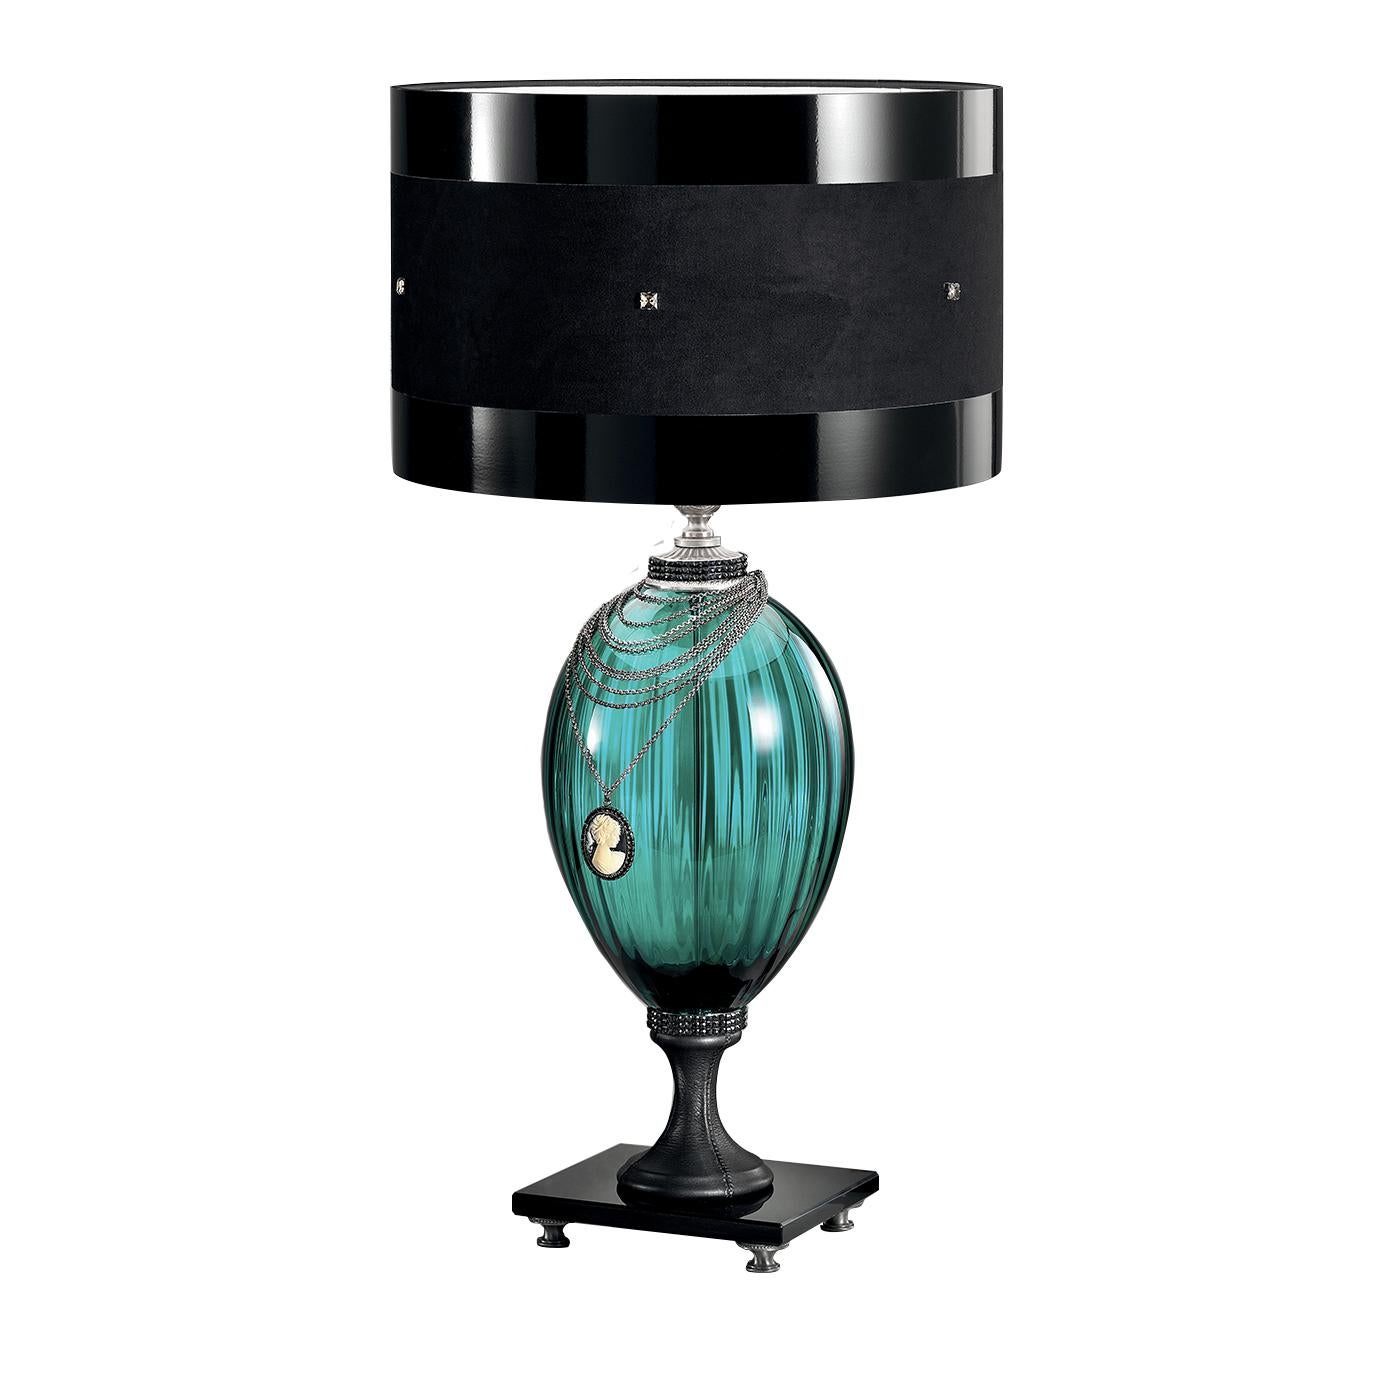 True protagonist of this magnificent lamp is the drum shade made of shiny, black chintz fabric with a bold alcantara central band and square antiqued silver details. Its refined black marble base with black rhinestones and black leather flared foot